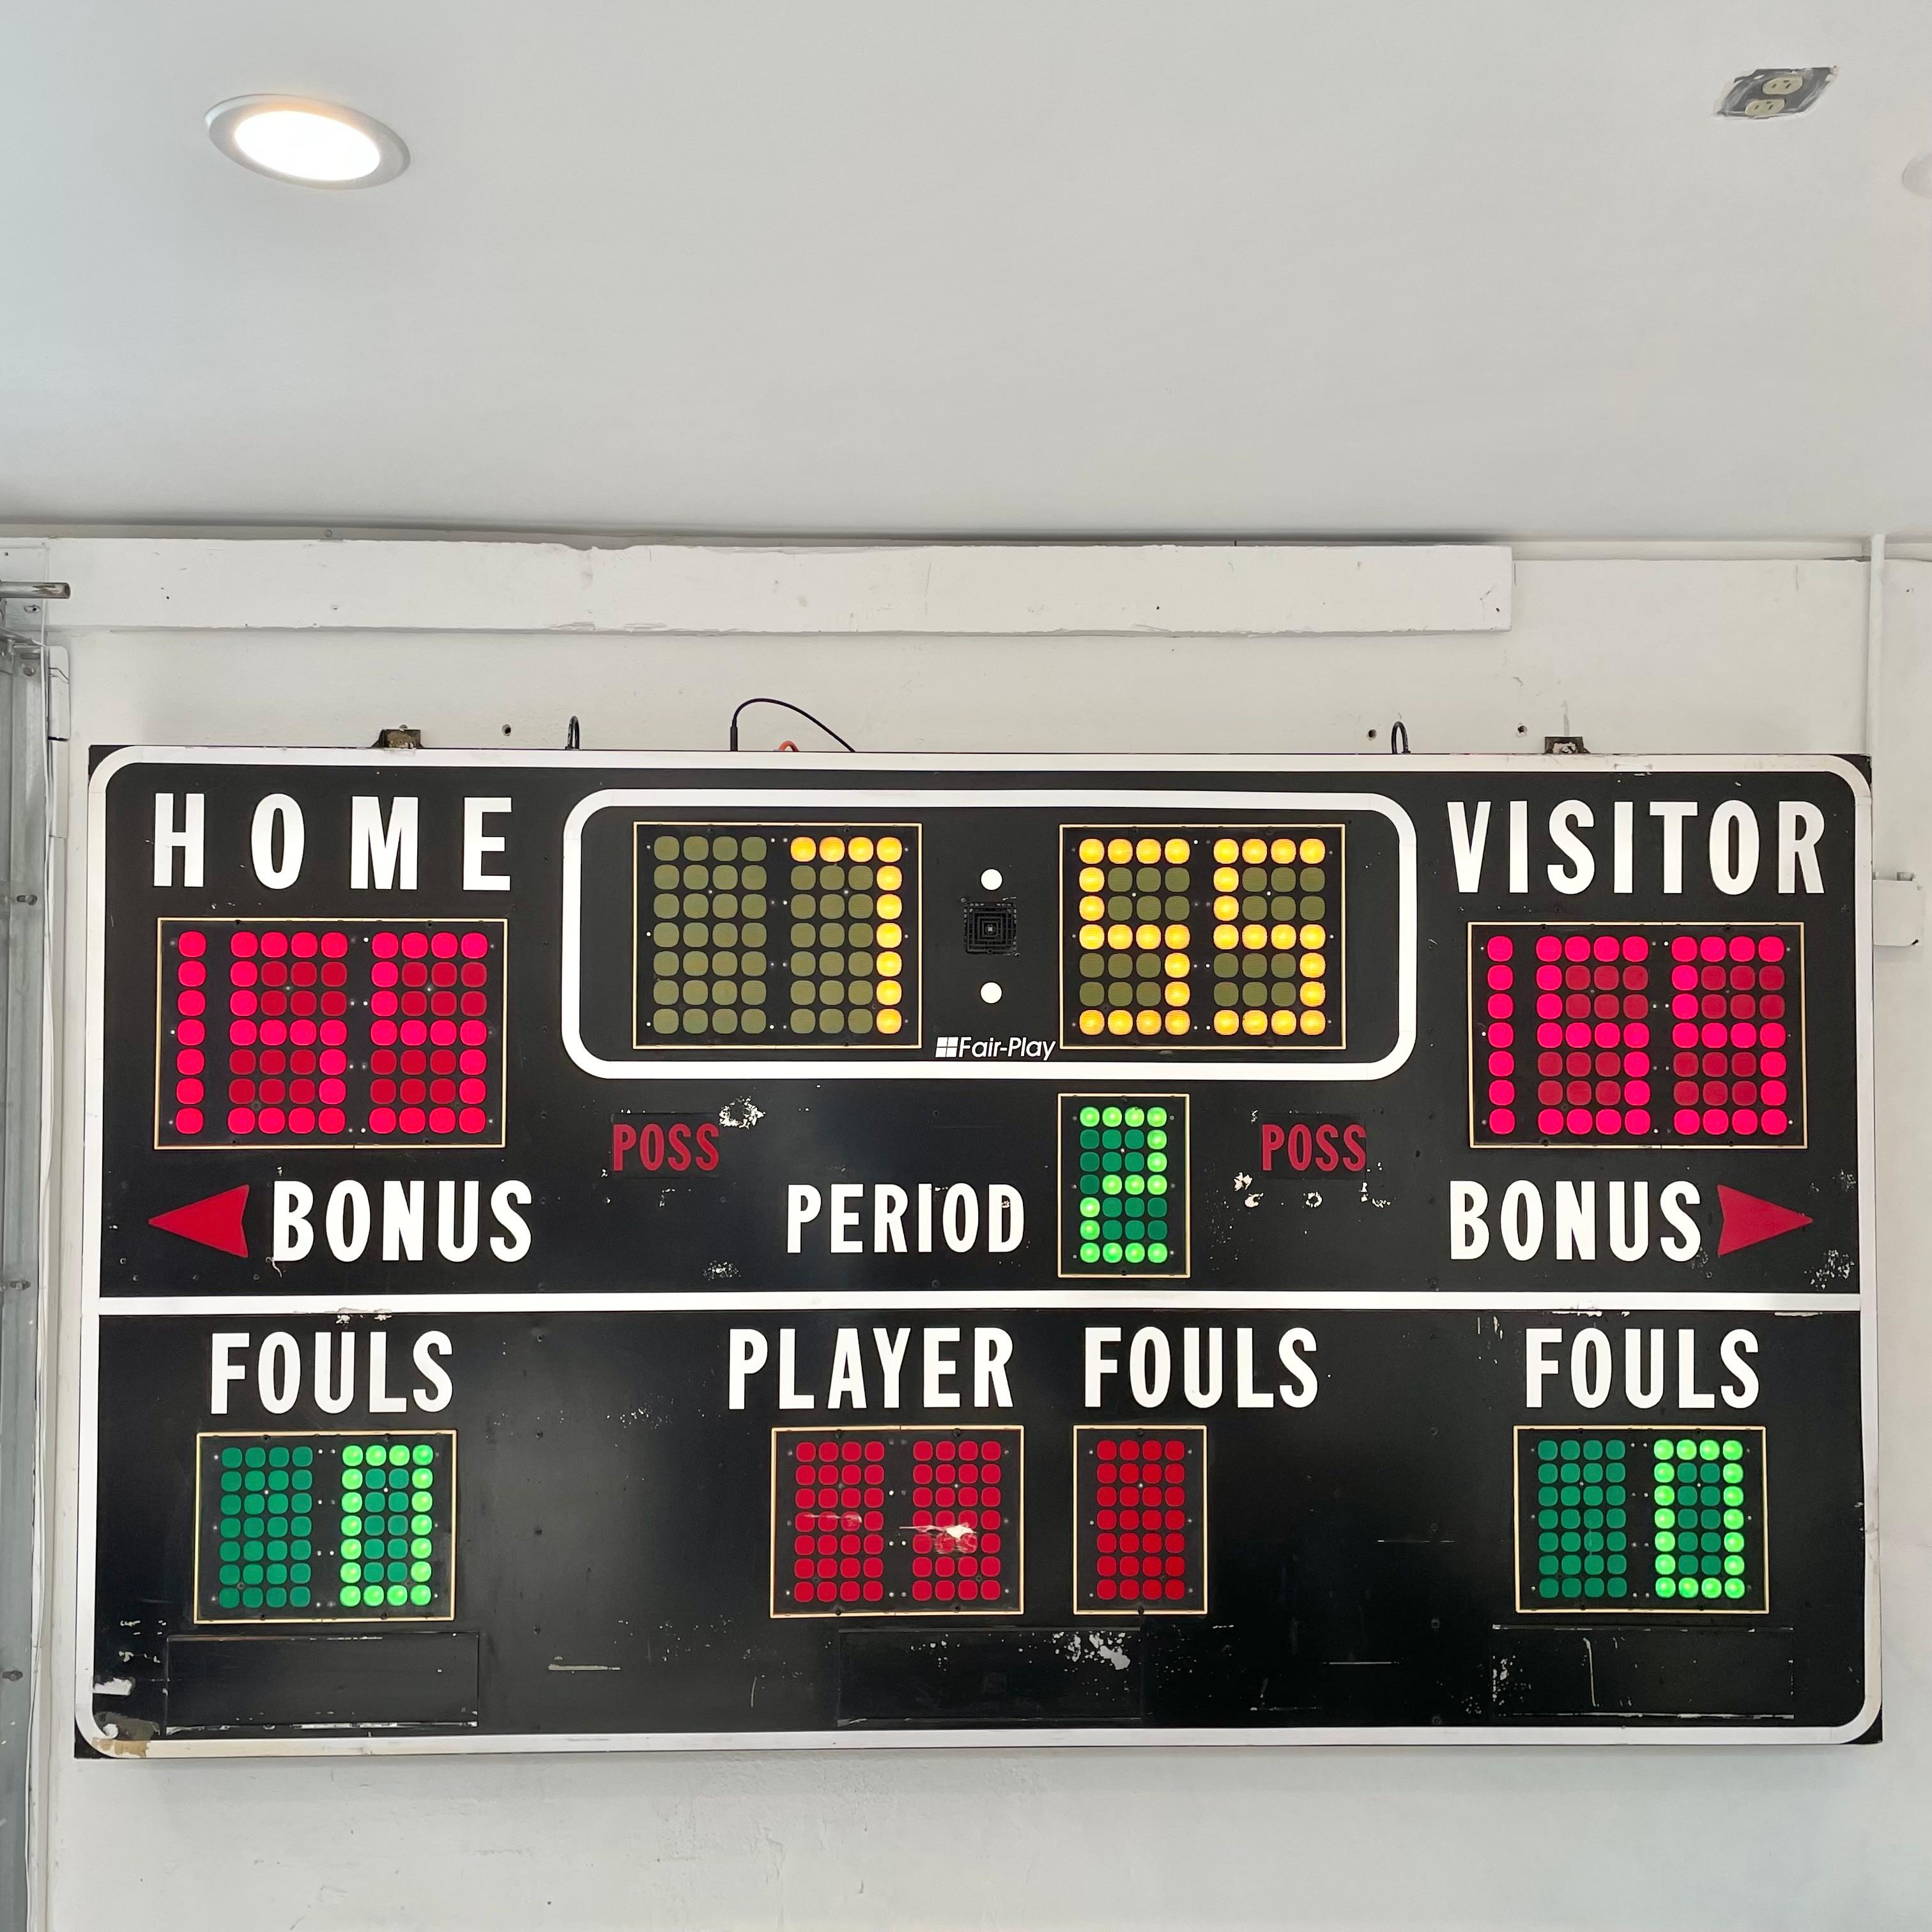 9 foot long basketball scoreboard by Fair Play. Made in the 1970s. Faded black frame with nice patina. Comes with working controller. Scoreboard features a running clock, home and visitor score, period, bonus/possession, and player/fouls all